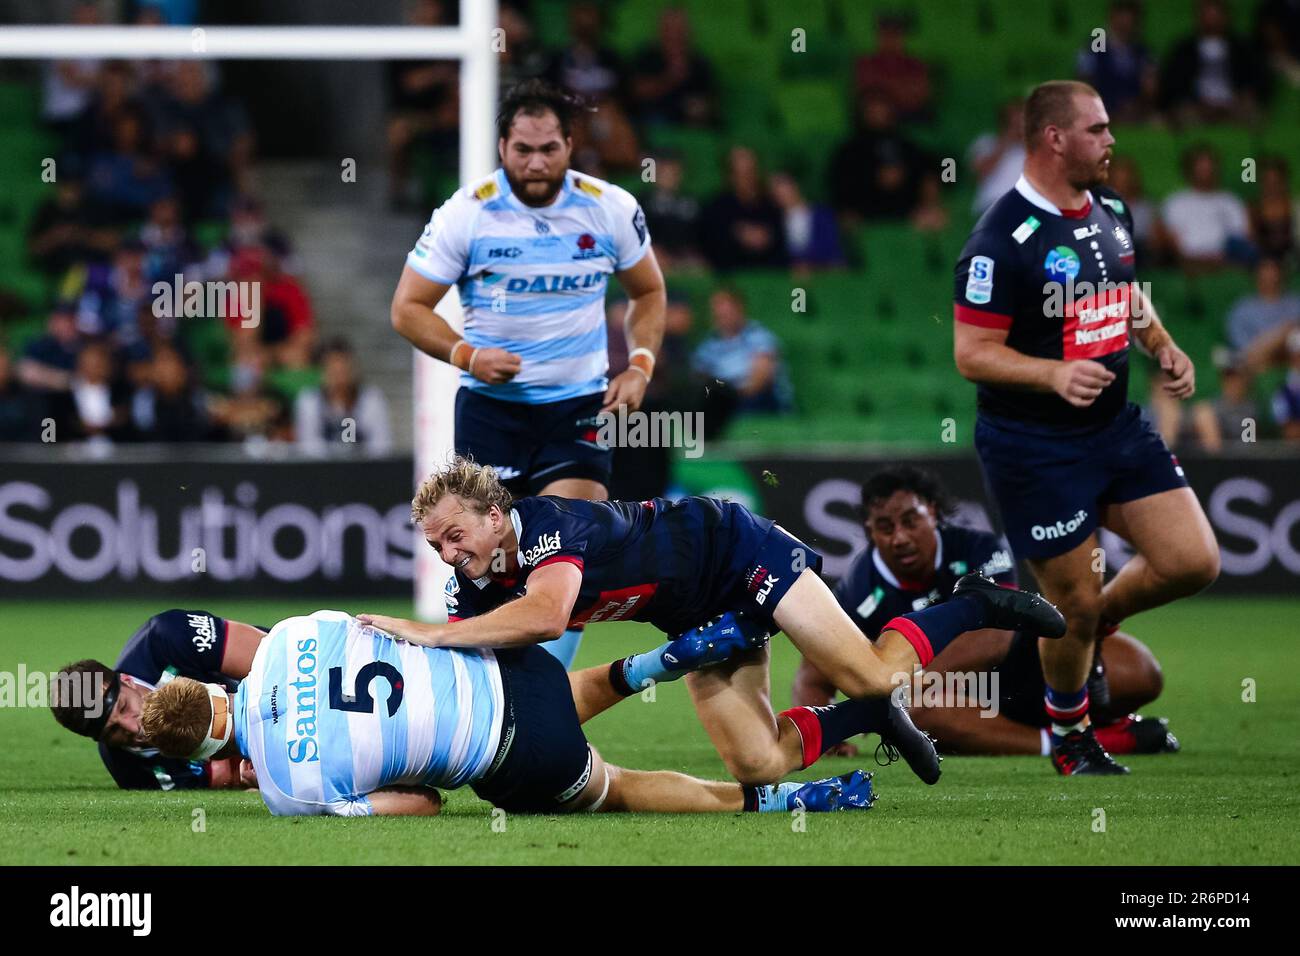 MELBOURNE, AUSTRALIA - MARCH 19: Joe Powell of the Melbourne Rebels during the round 5 Super Rugby match between the Melbourne Rebels and NSW Waratahs at AAMI Park on March 19, 2021 in Melbourne, Australia. Stock Photo